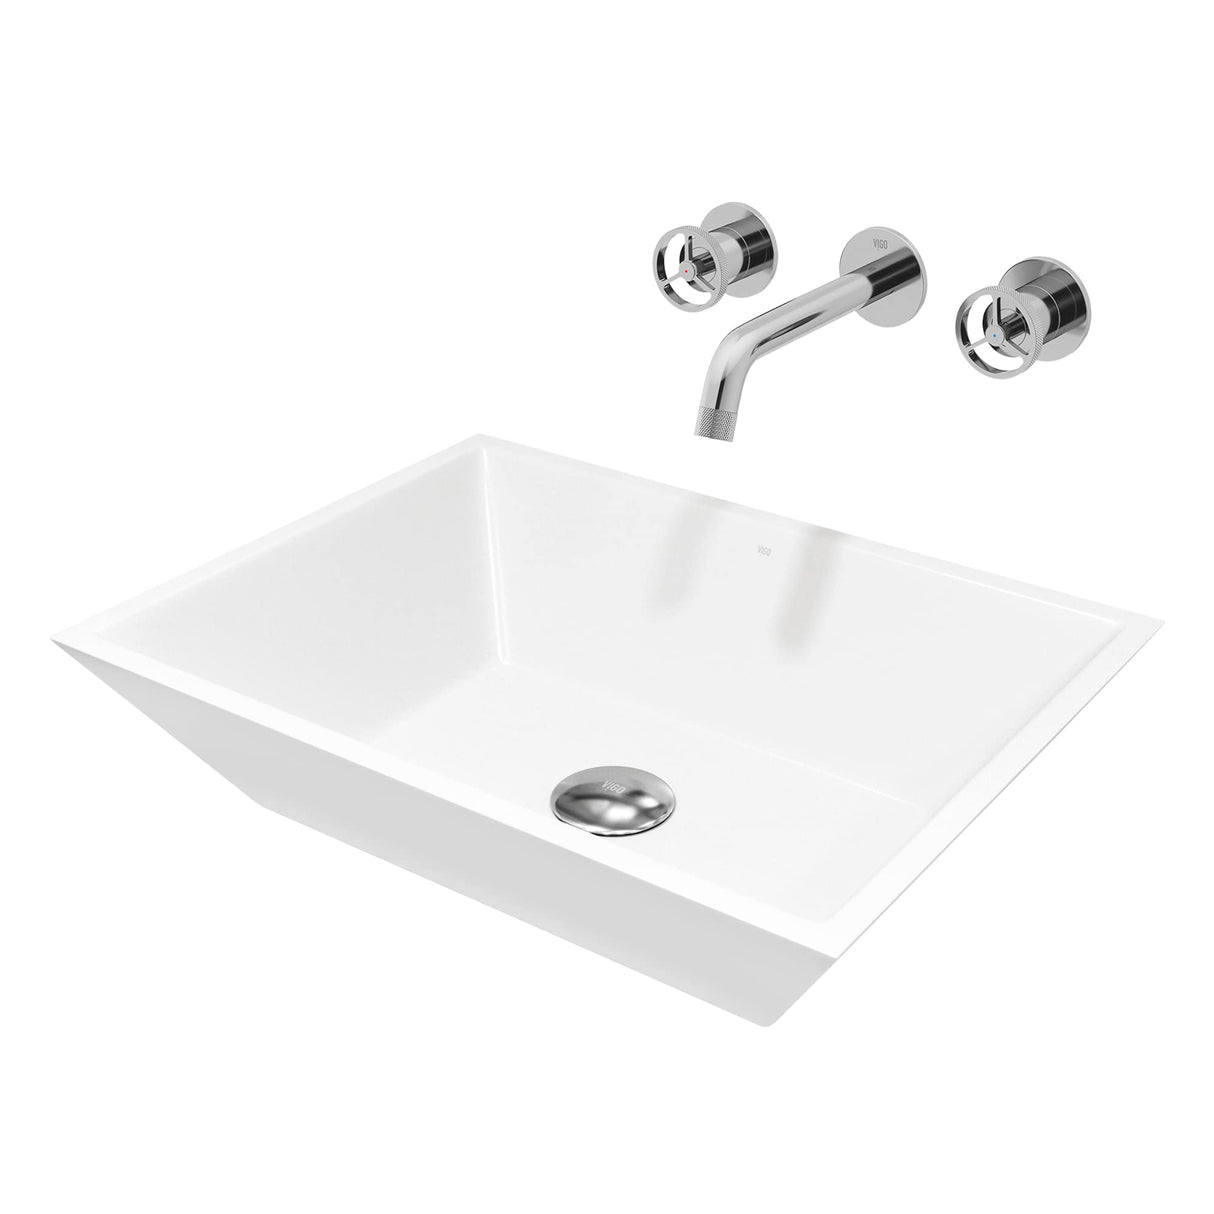 VIGO VGT2066 13.75" L -18.0" W -4.63" H Matte Stone Vinca Composite Rectangular Vessel Bathroom Sink in White with Wall-Mount Faucet and Pop-Up Drain in Chrome